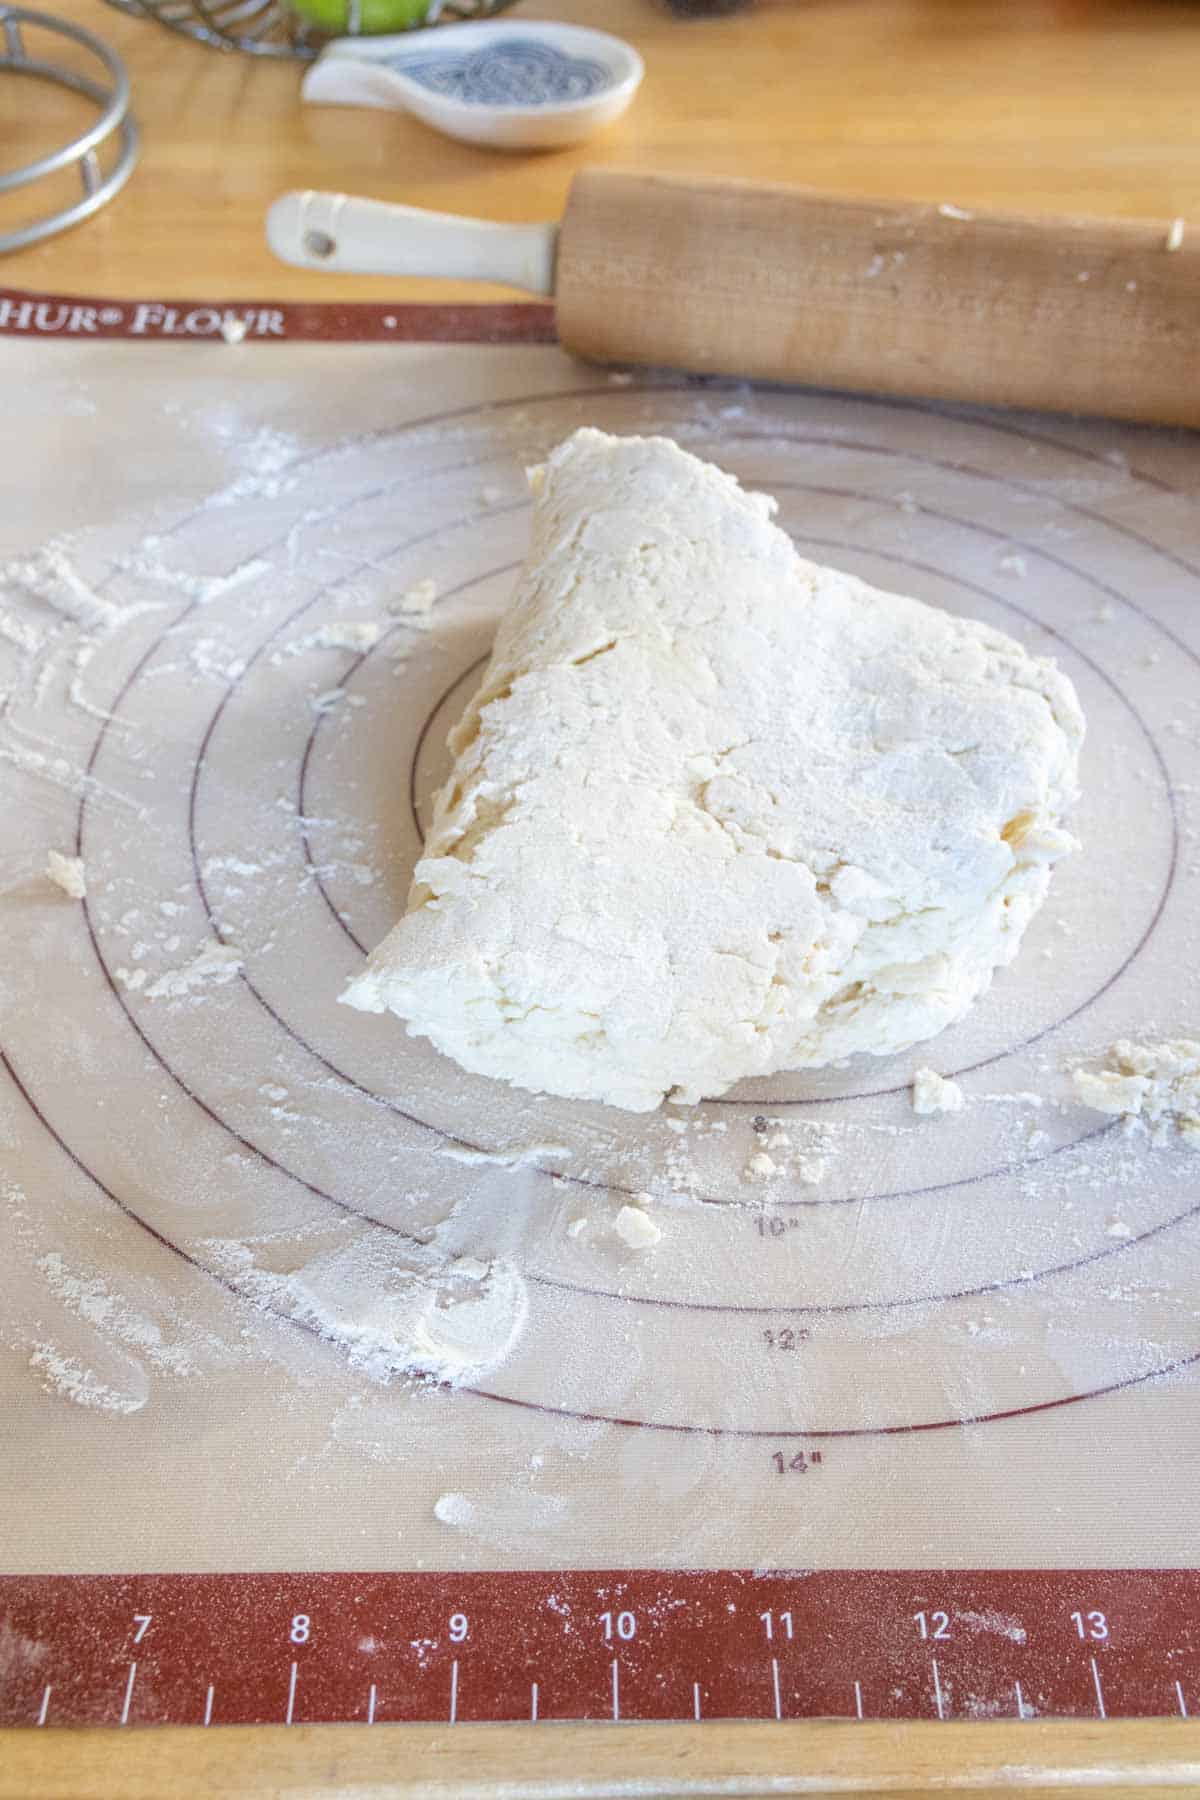 Biscuit dough folded over on a floured surface.